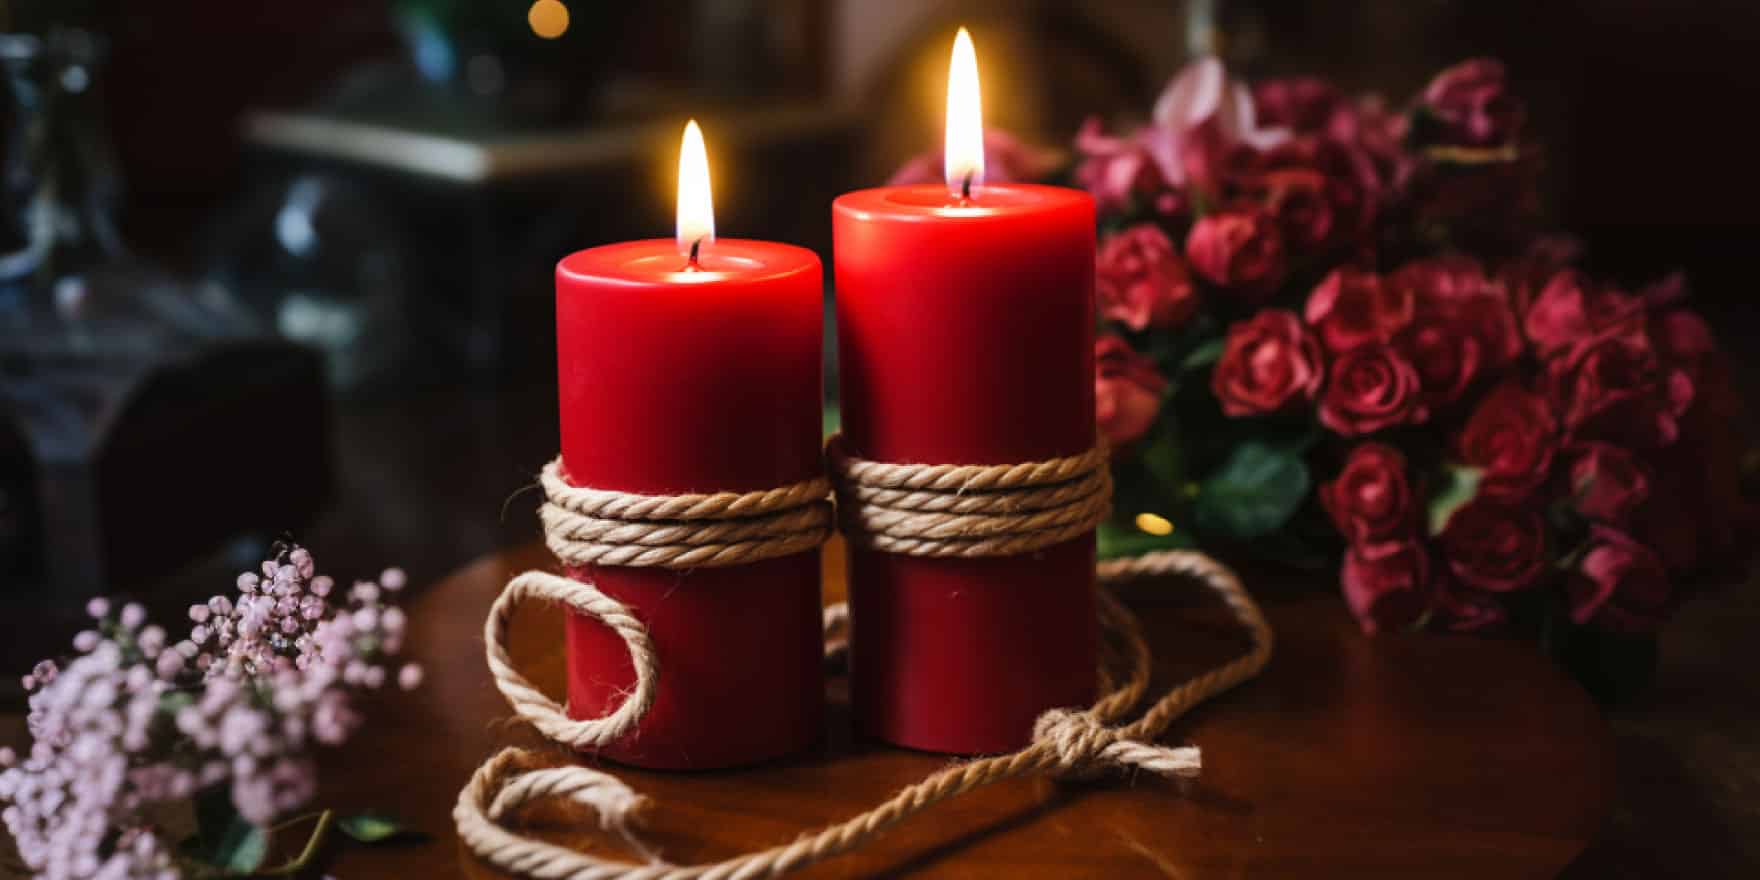 A love spell with two red candles bound by hemp rope